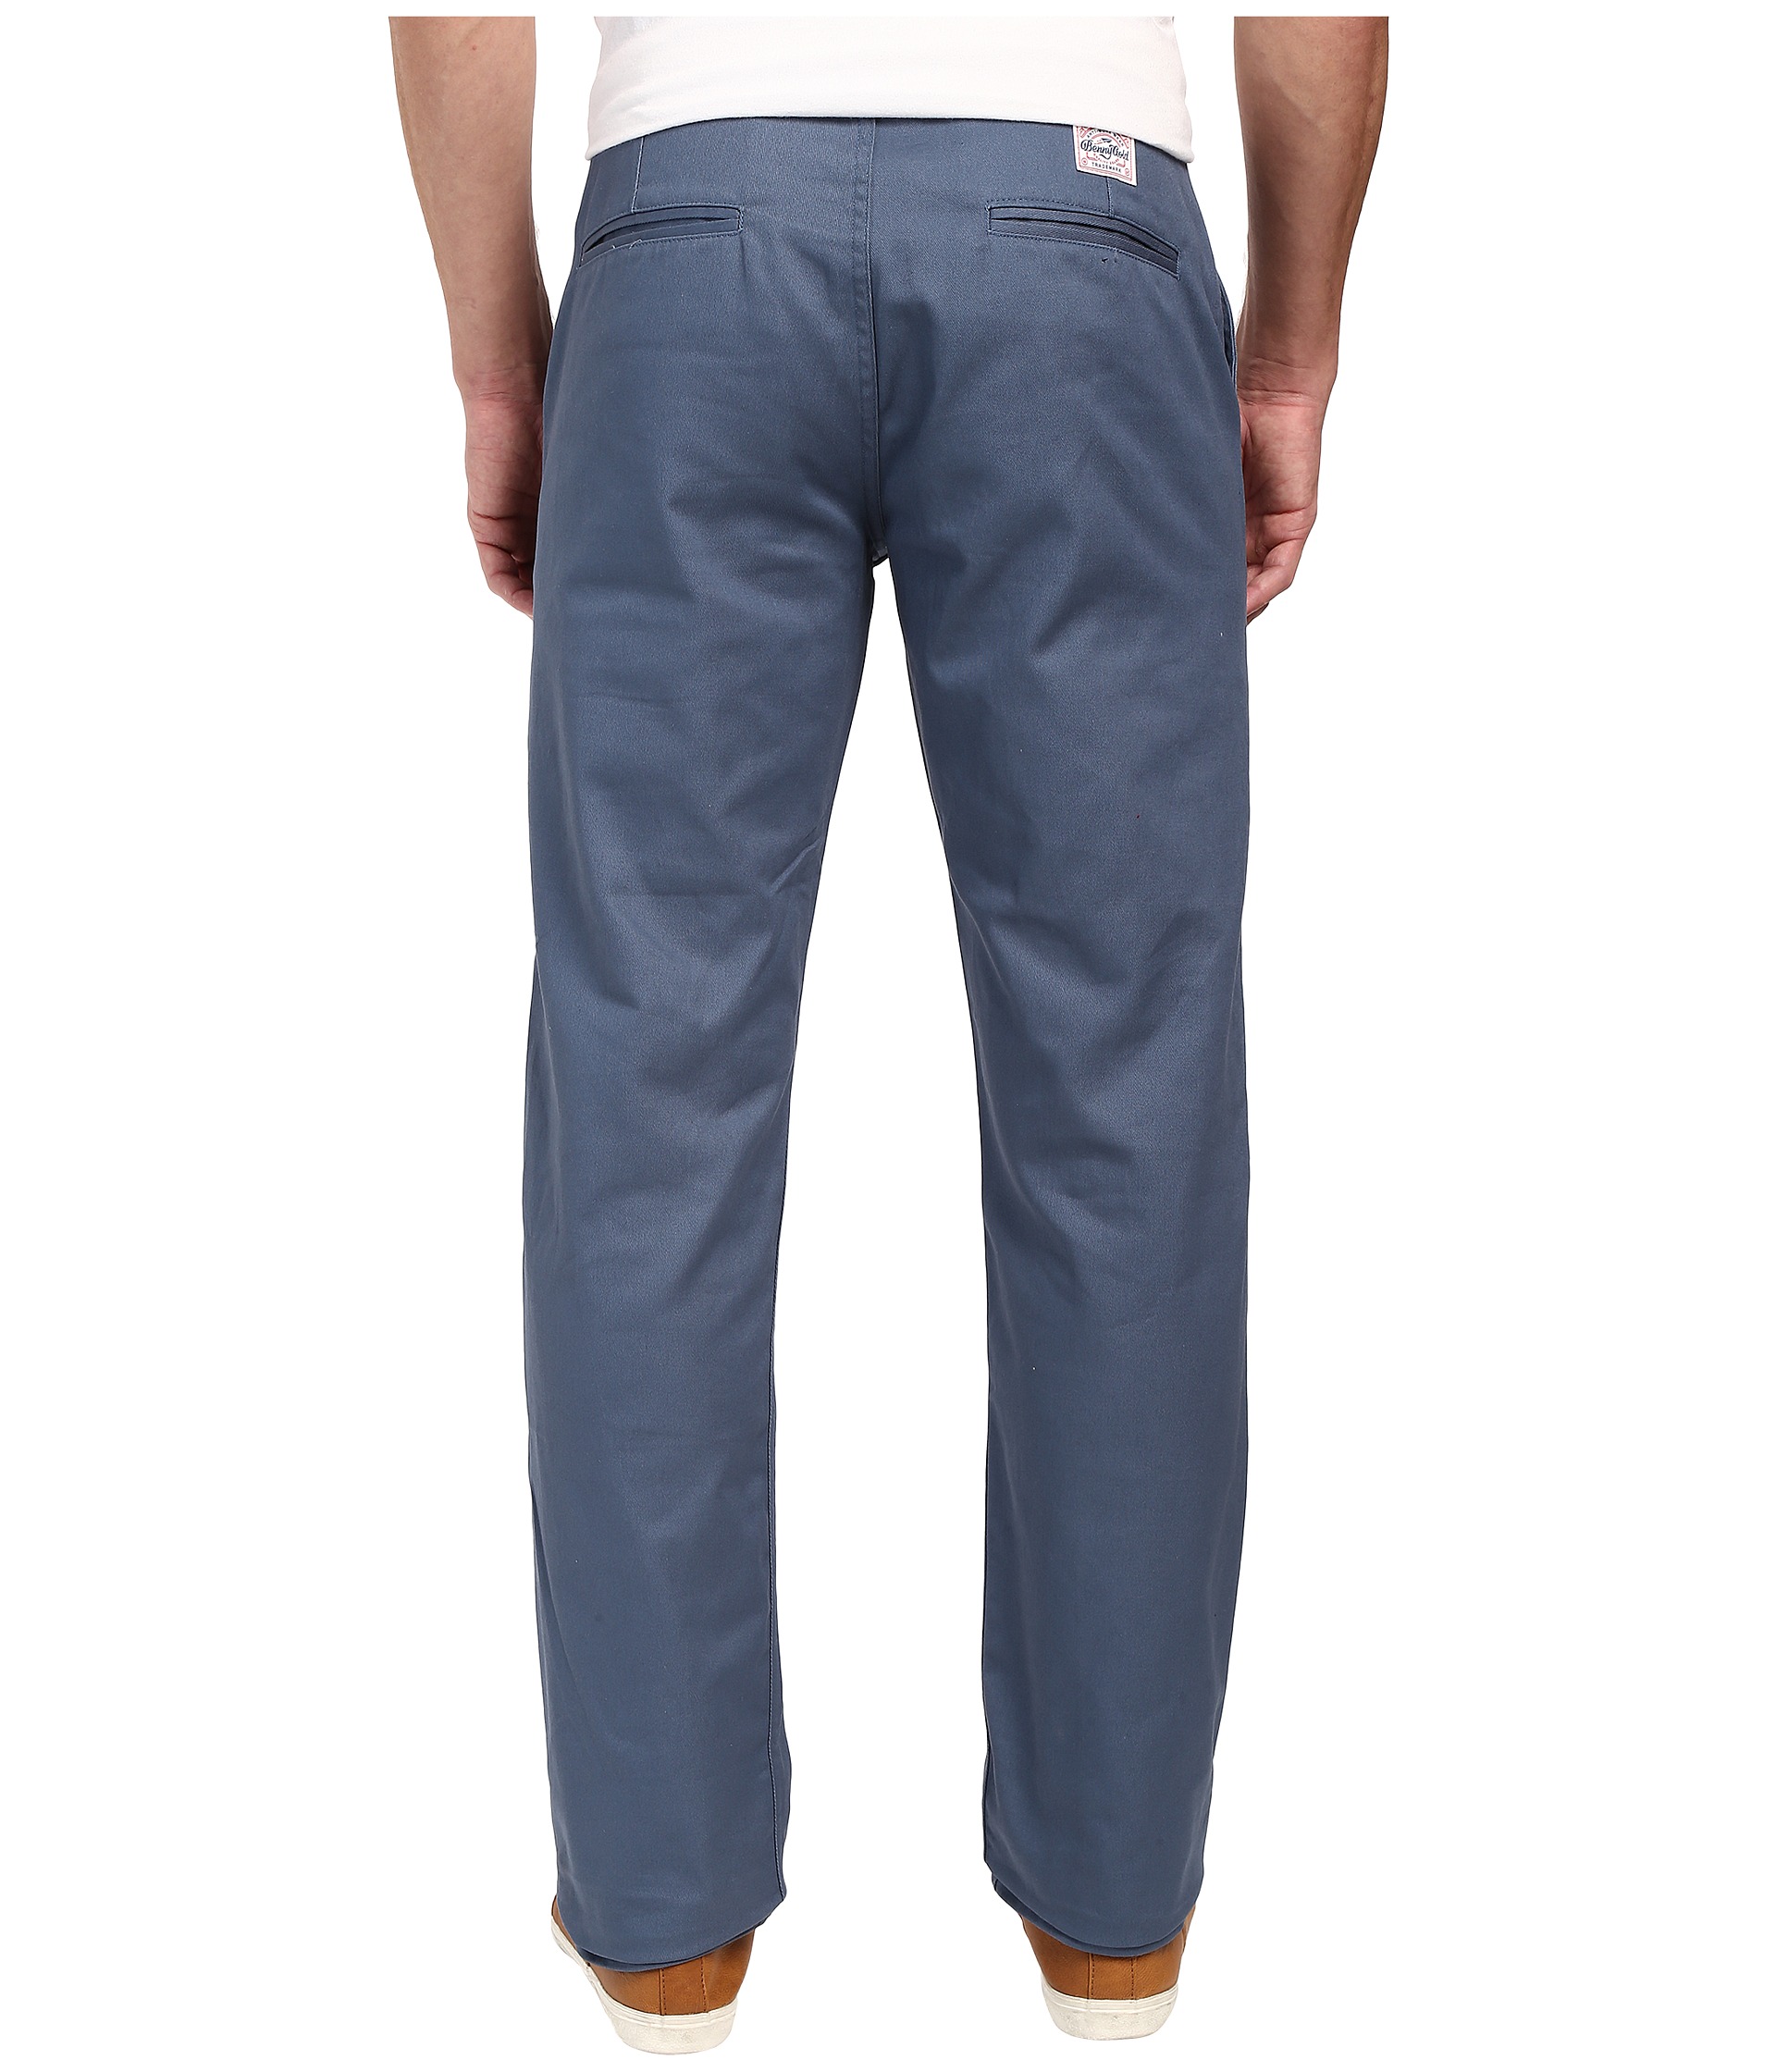 Benny Gold First Class Chino Pants Slate